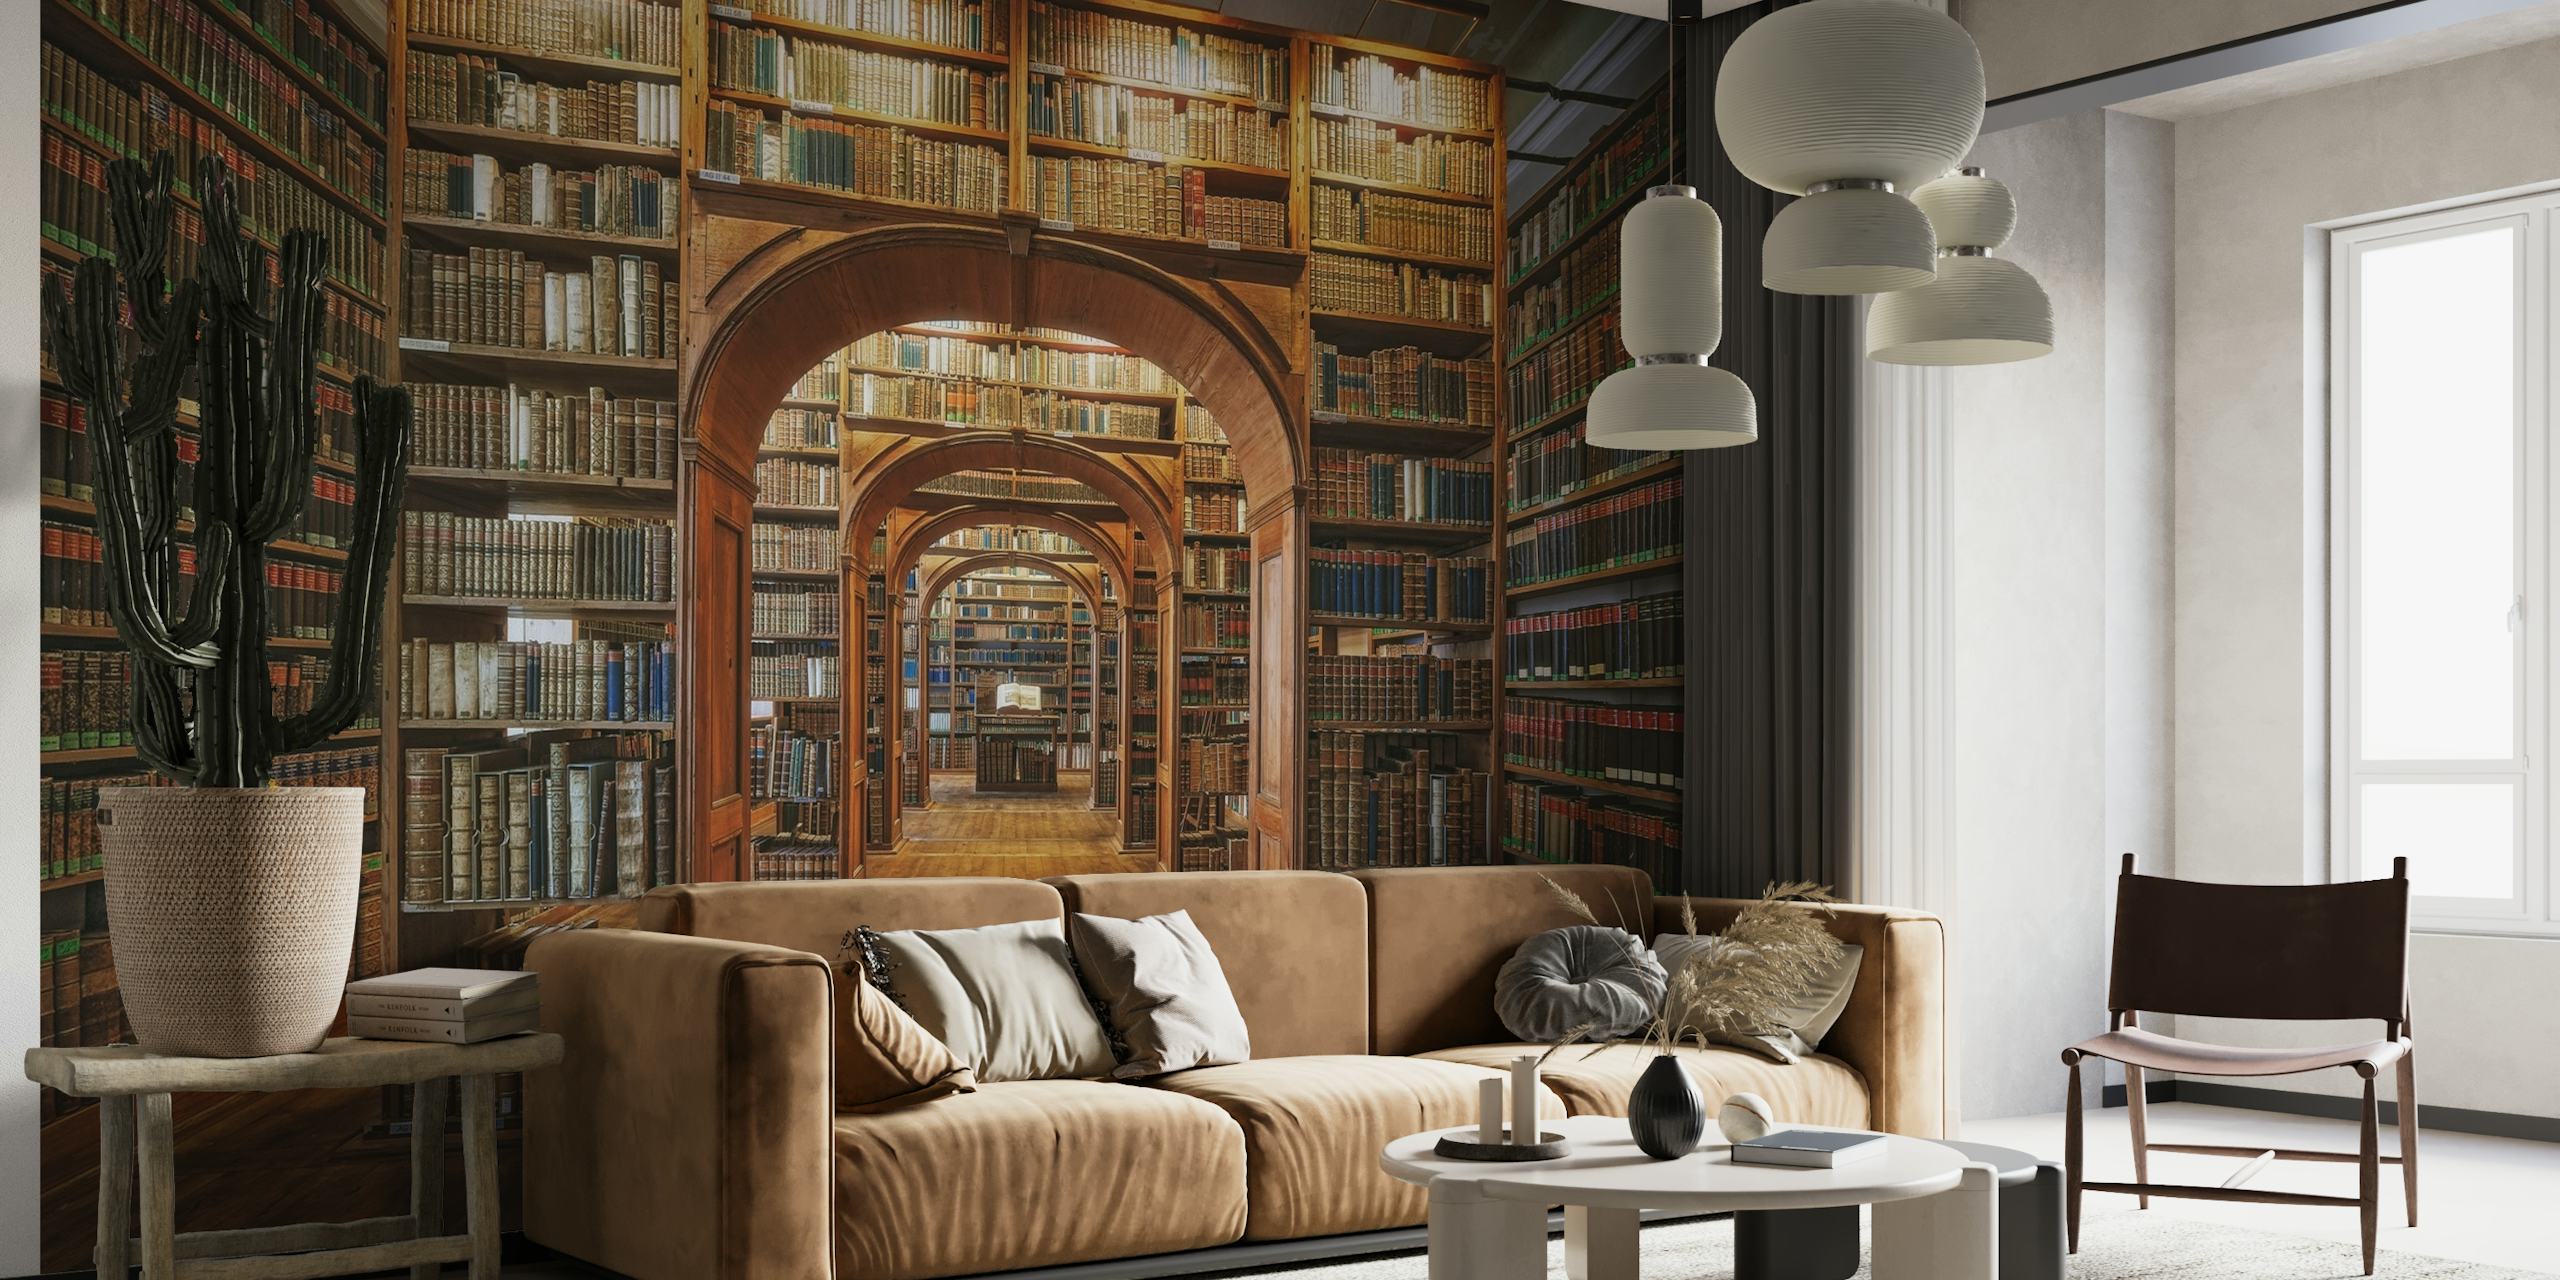 Upper Lausitzian Library of Sciences wall mural with bookshelves and arched passageway